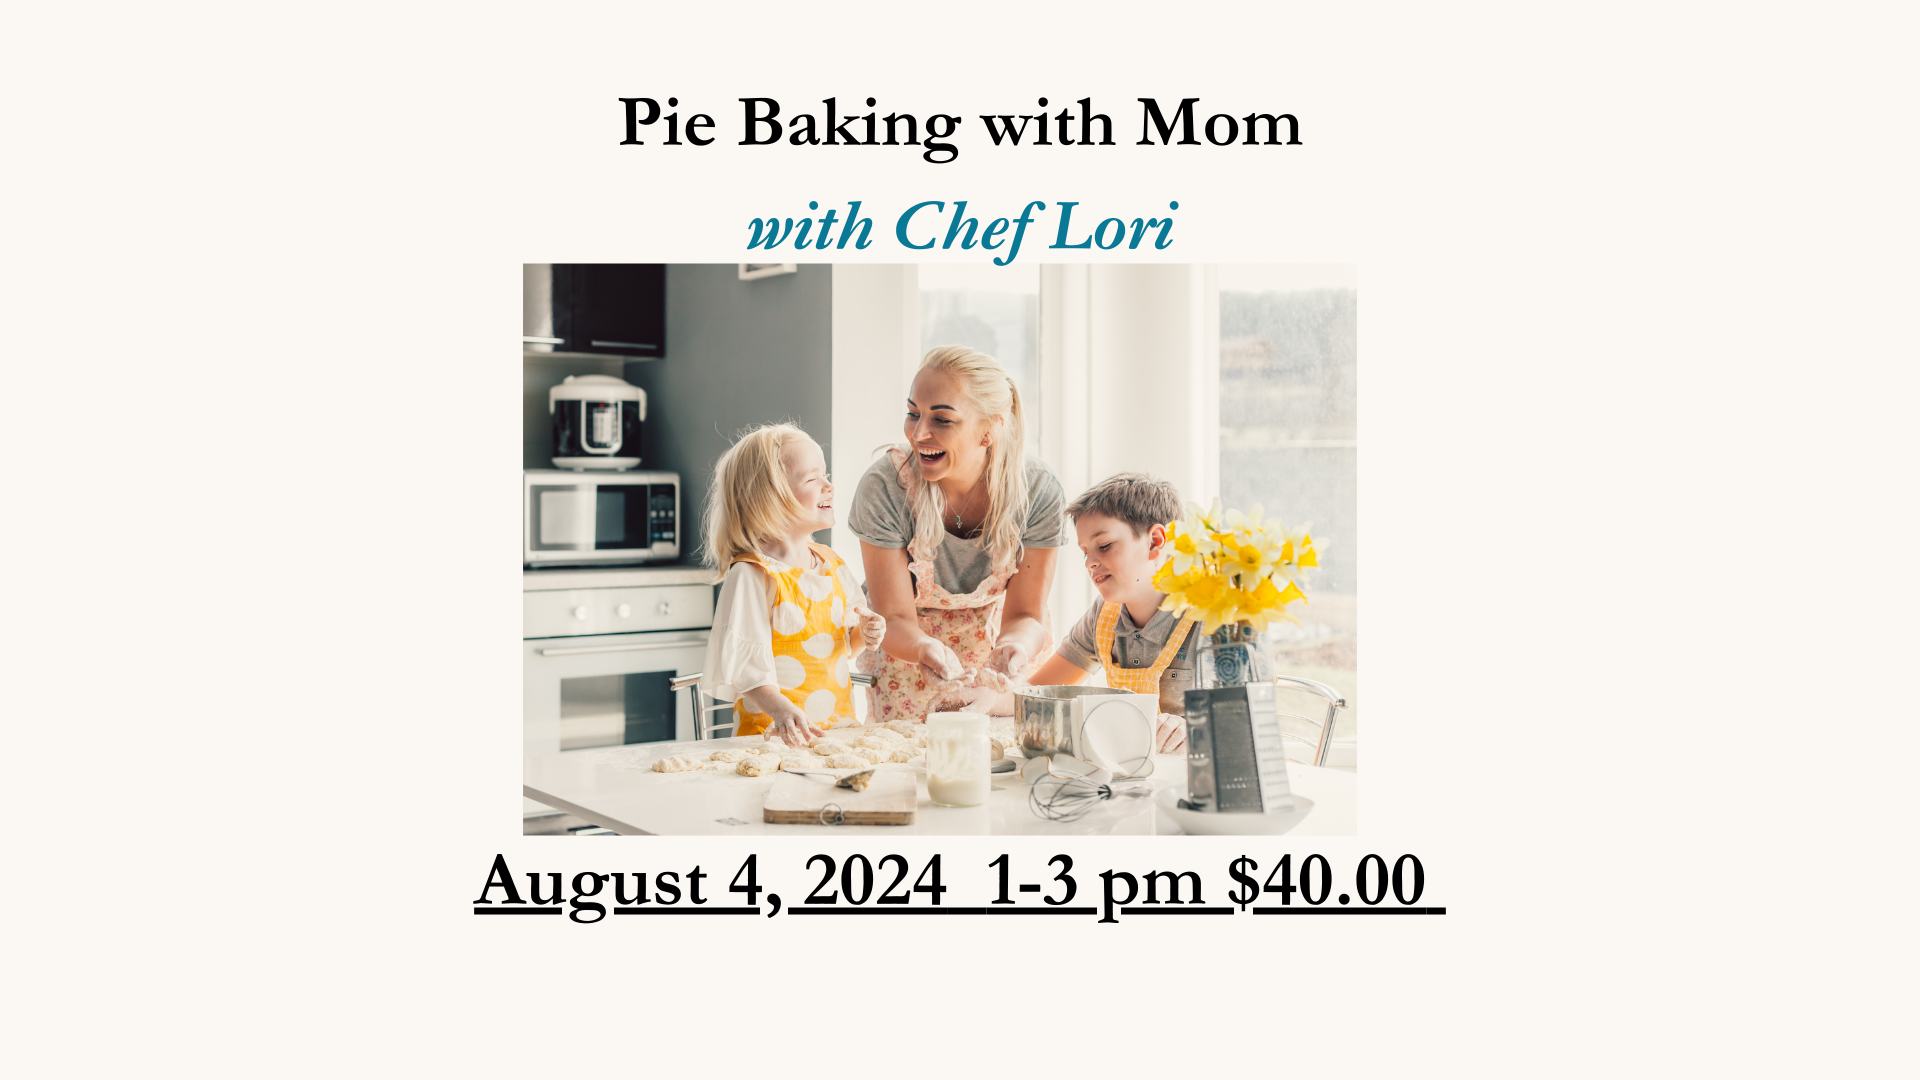 Pie Baking with Mom Aug 4, 2024  1-3pm $40.0